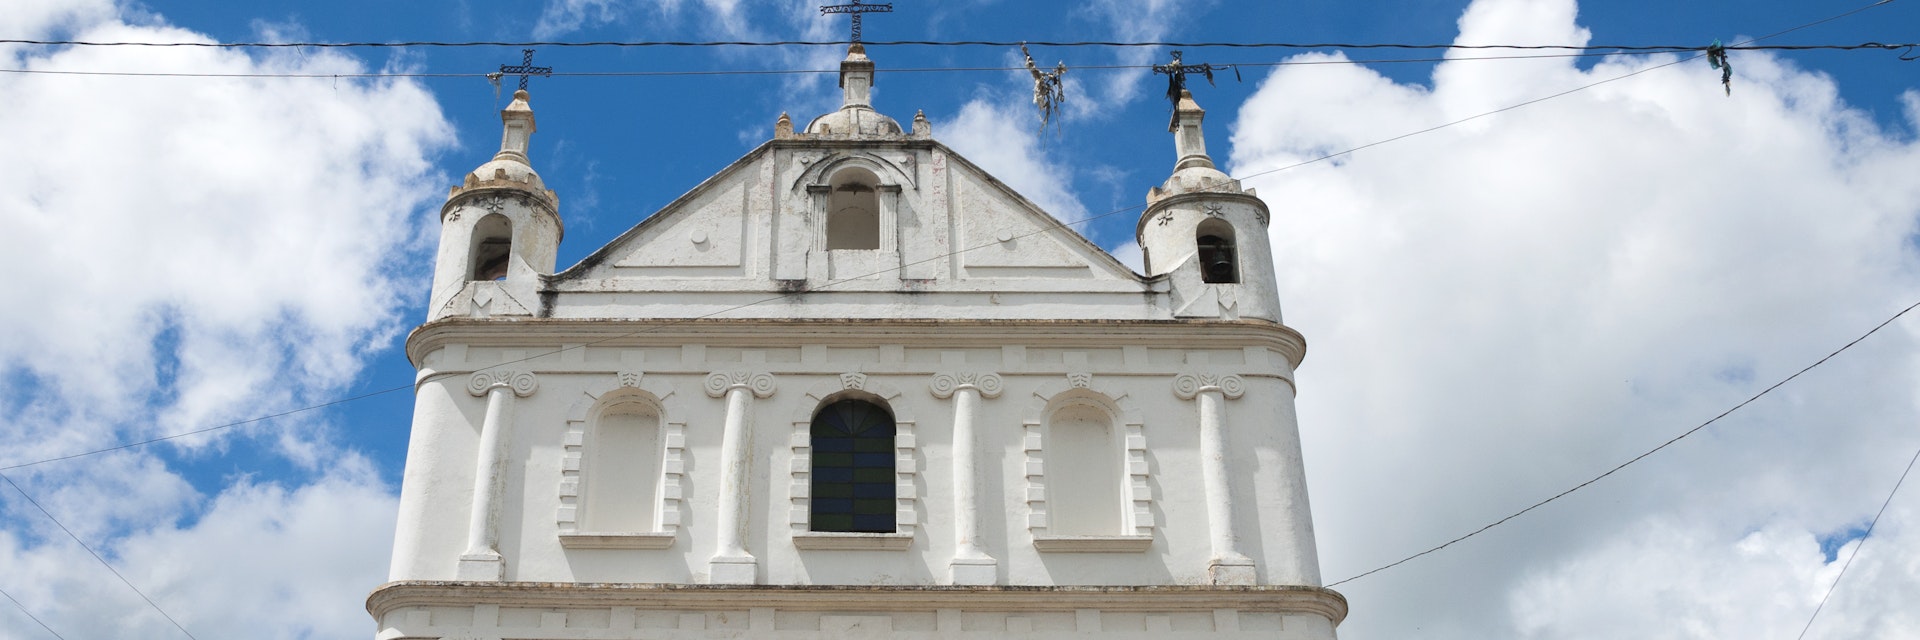 Catholic church in Tactic, p'oq'omchí is Duraznal in Alta Verapaz, Guatemala.